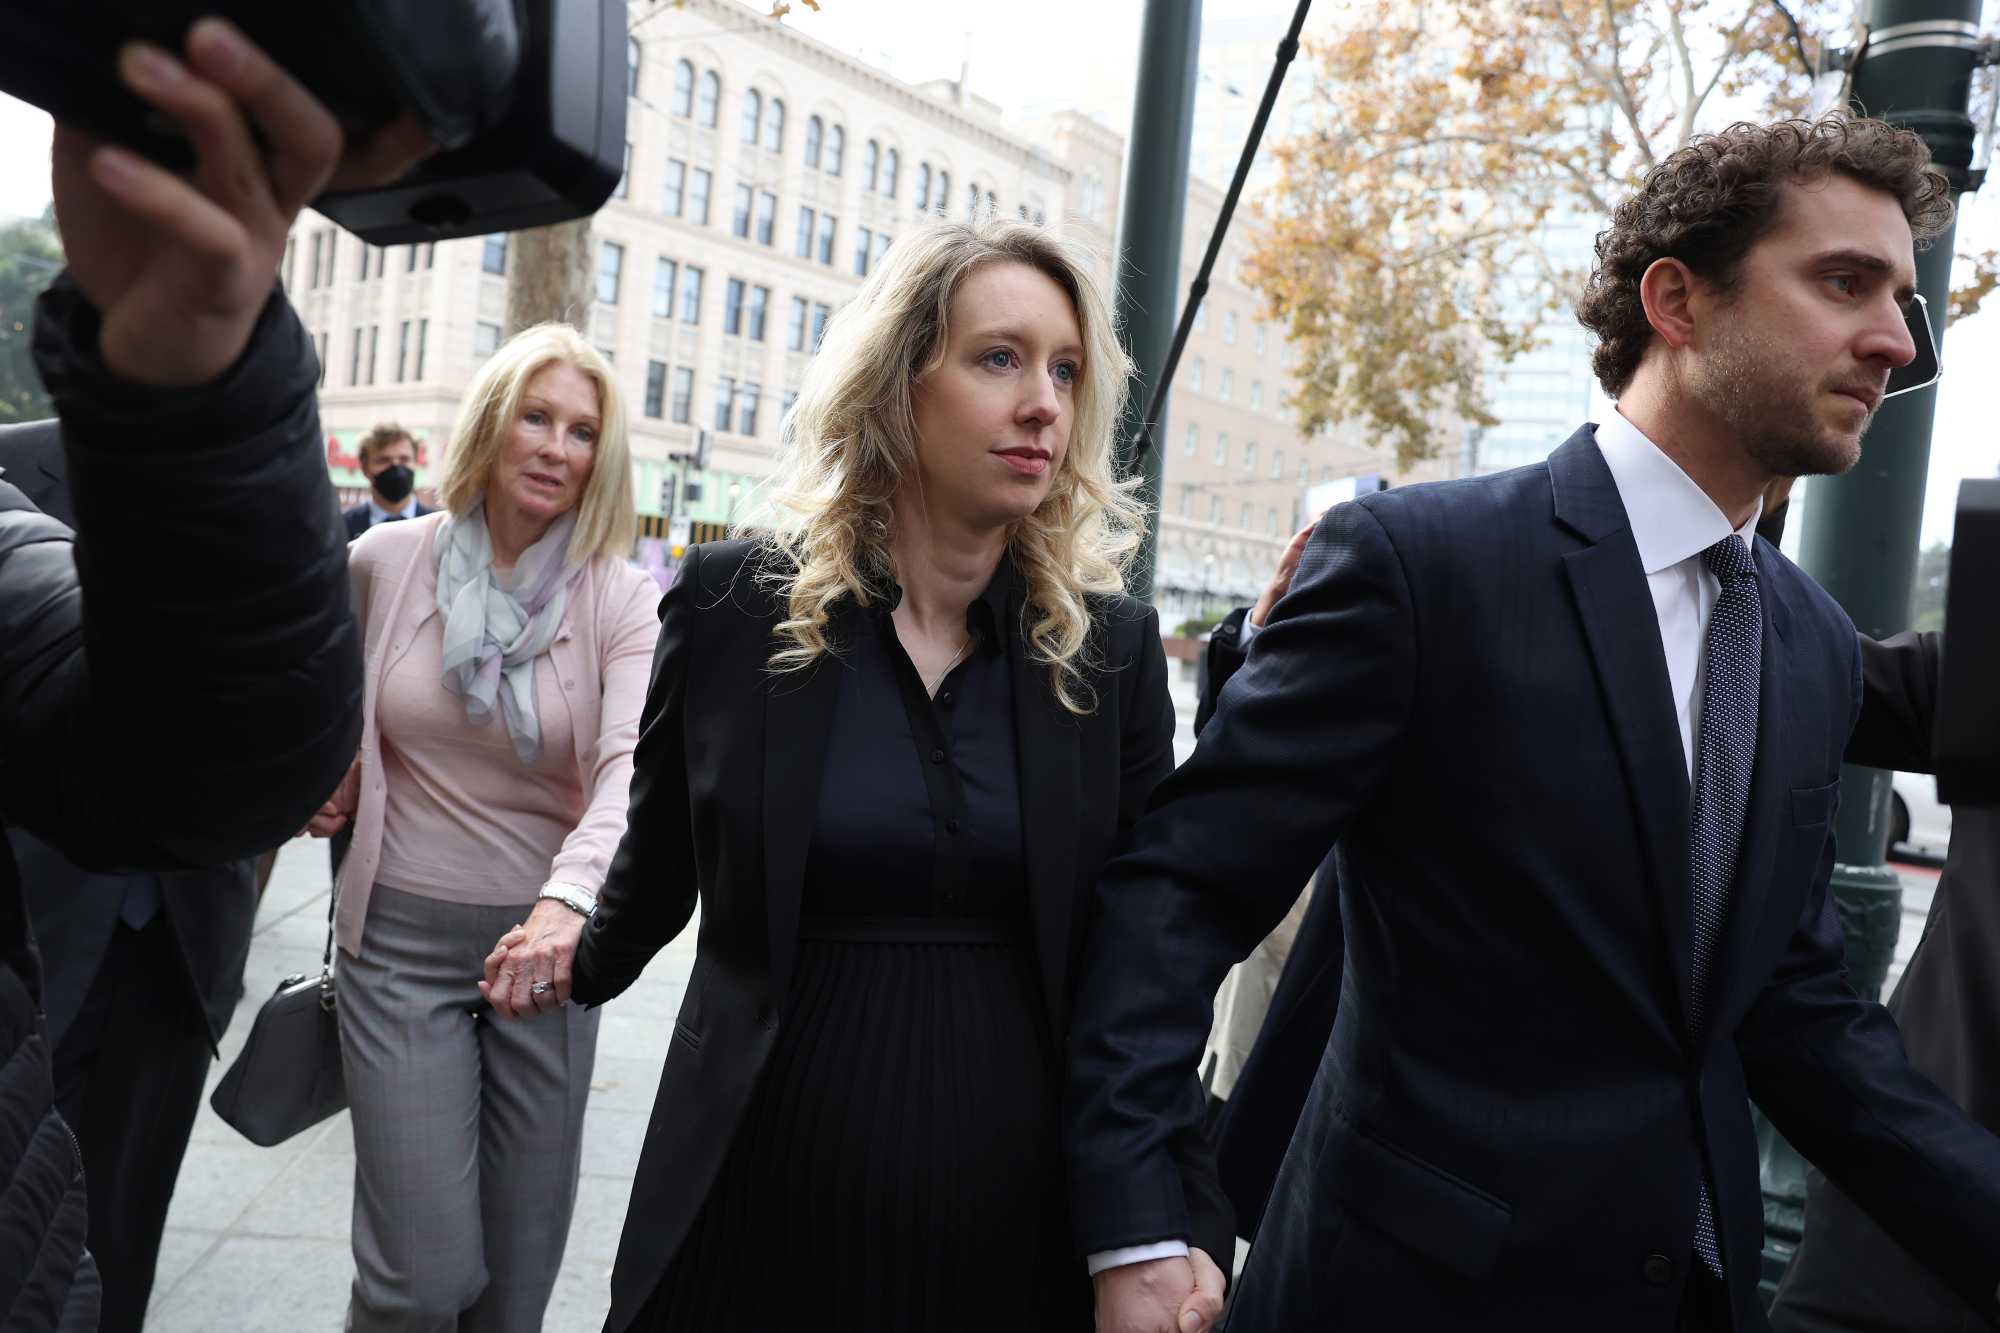 Elizabeth Holmes arrives in court for her sentencing in Theranos fraud